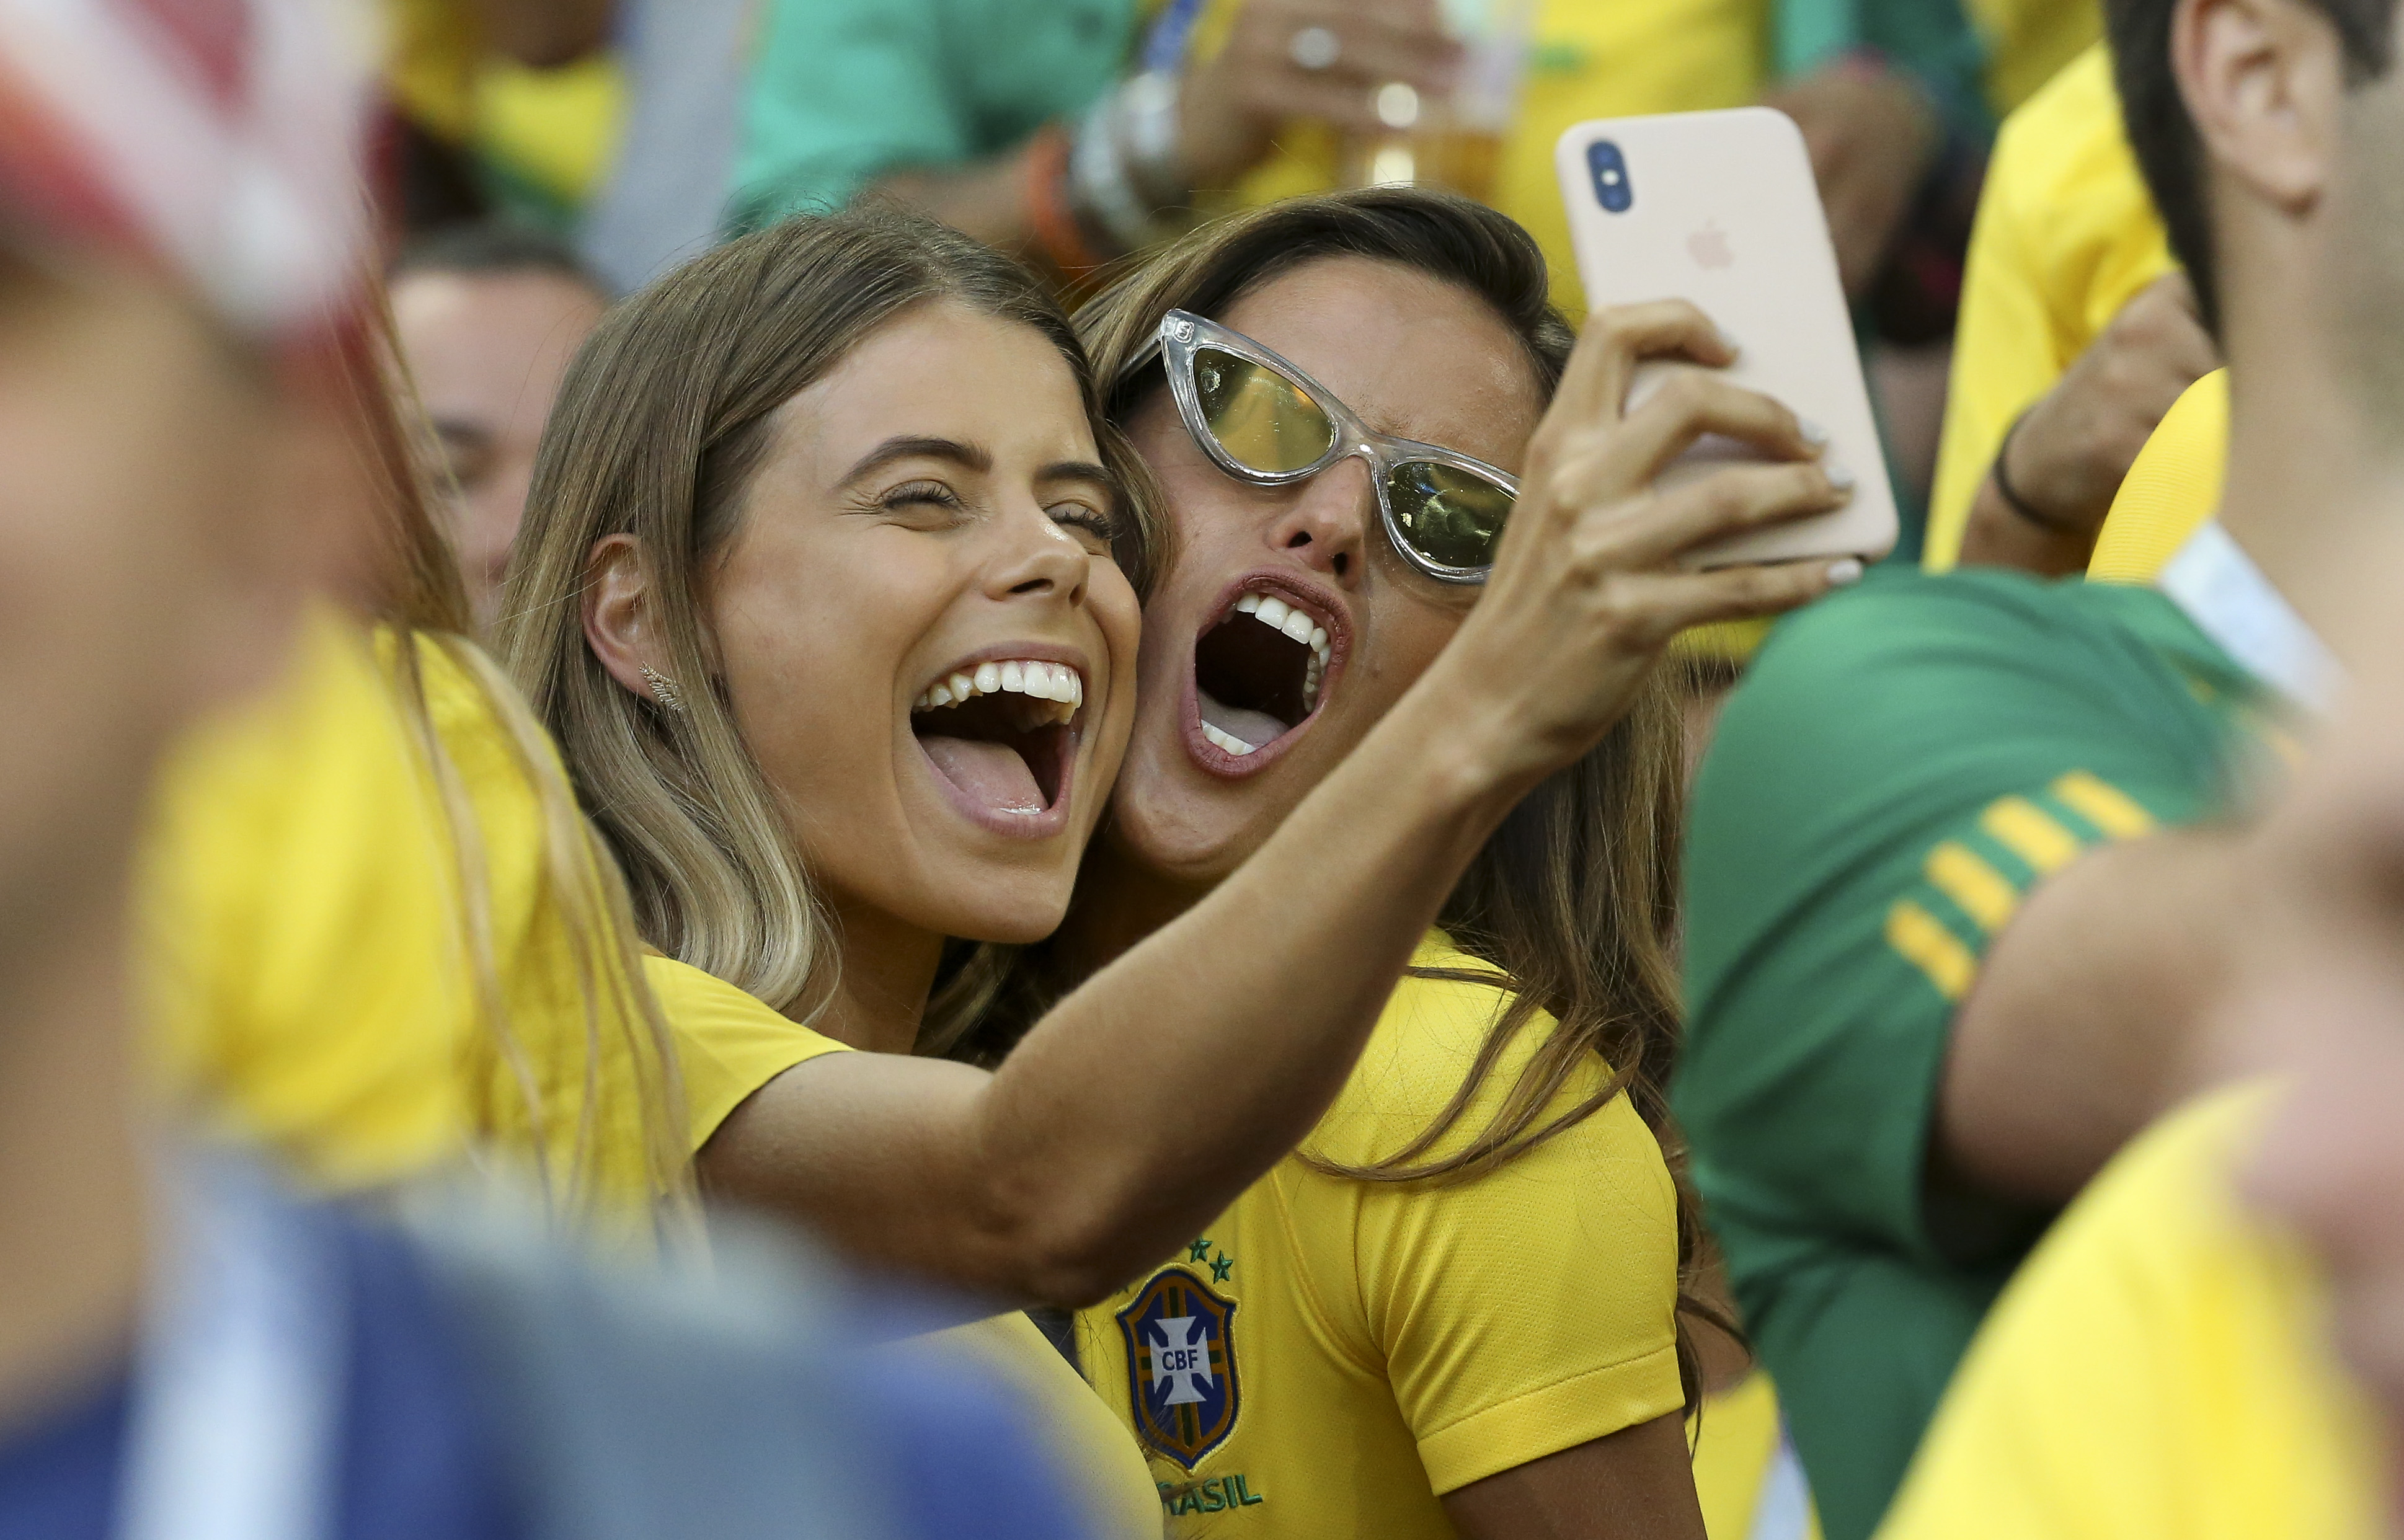 Carolina Cabrino, wife of Marquinhos of Brazil and Izabel Goulart, Brazilian top model (girlfriend of goalkeeper of Germany Kevin Trapp) during the 2018 FIFA World Cup Russia group E match between Serbia and Brazil at Spartak Stadium on June 27, 2018 in Moscow, Russia. (Jean Catuffe/Getty Images)